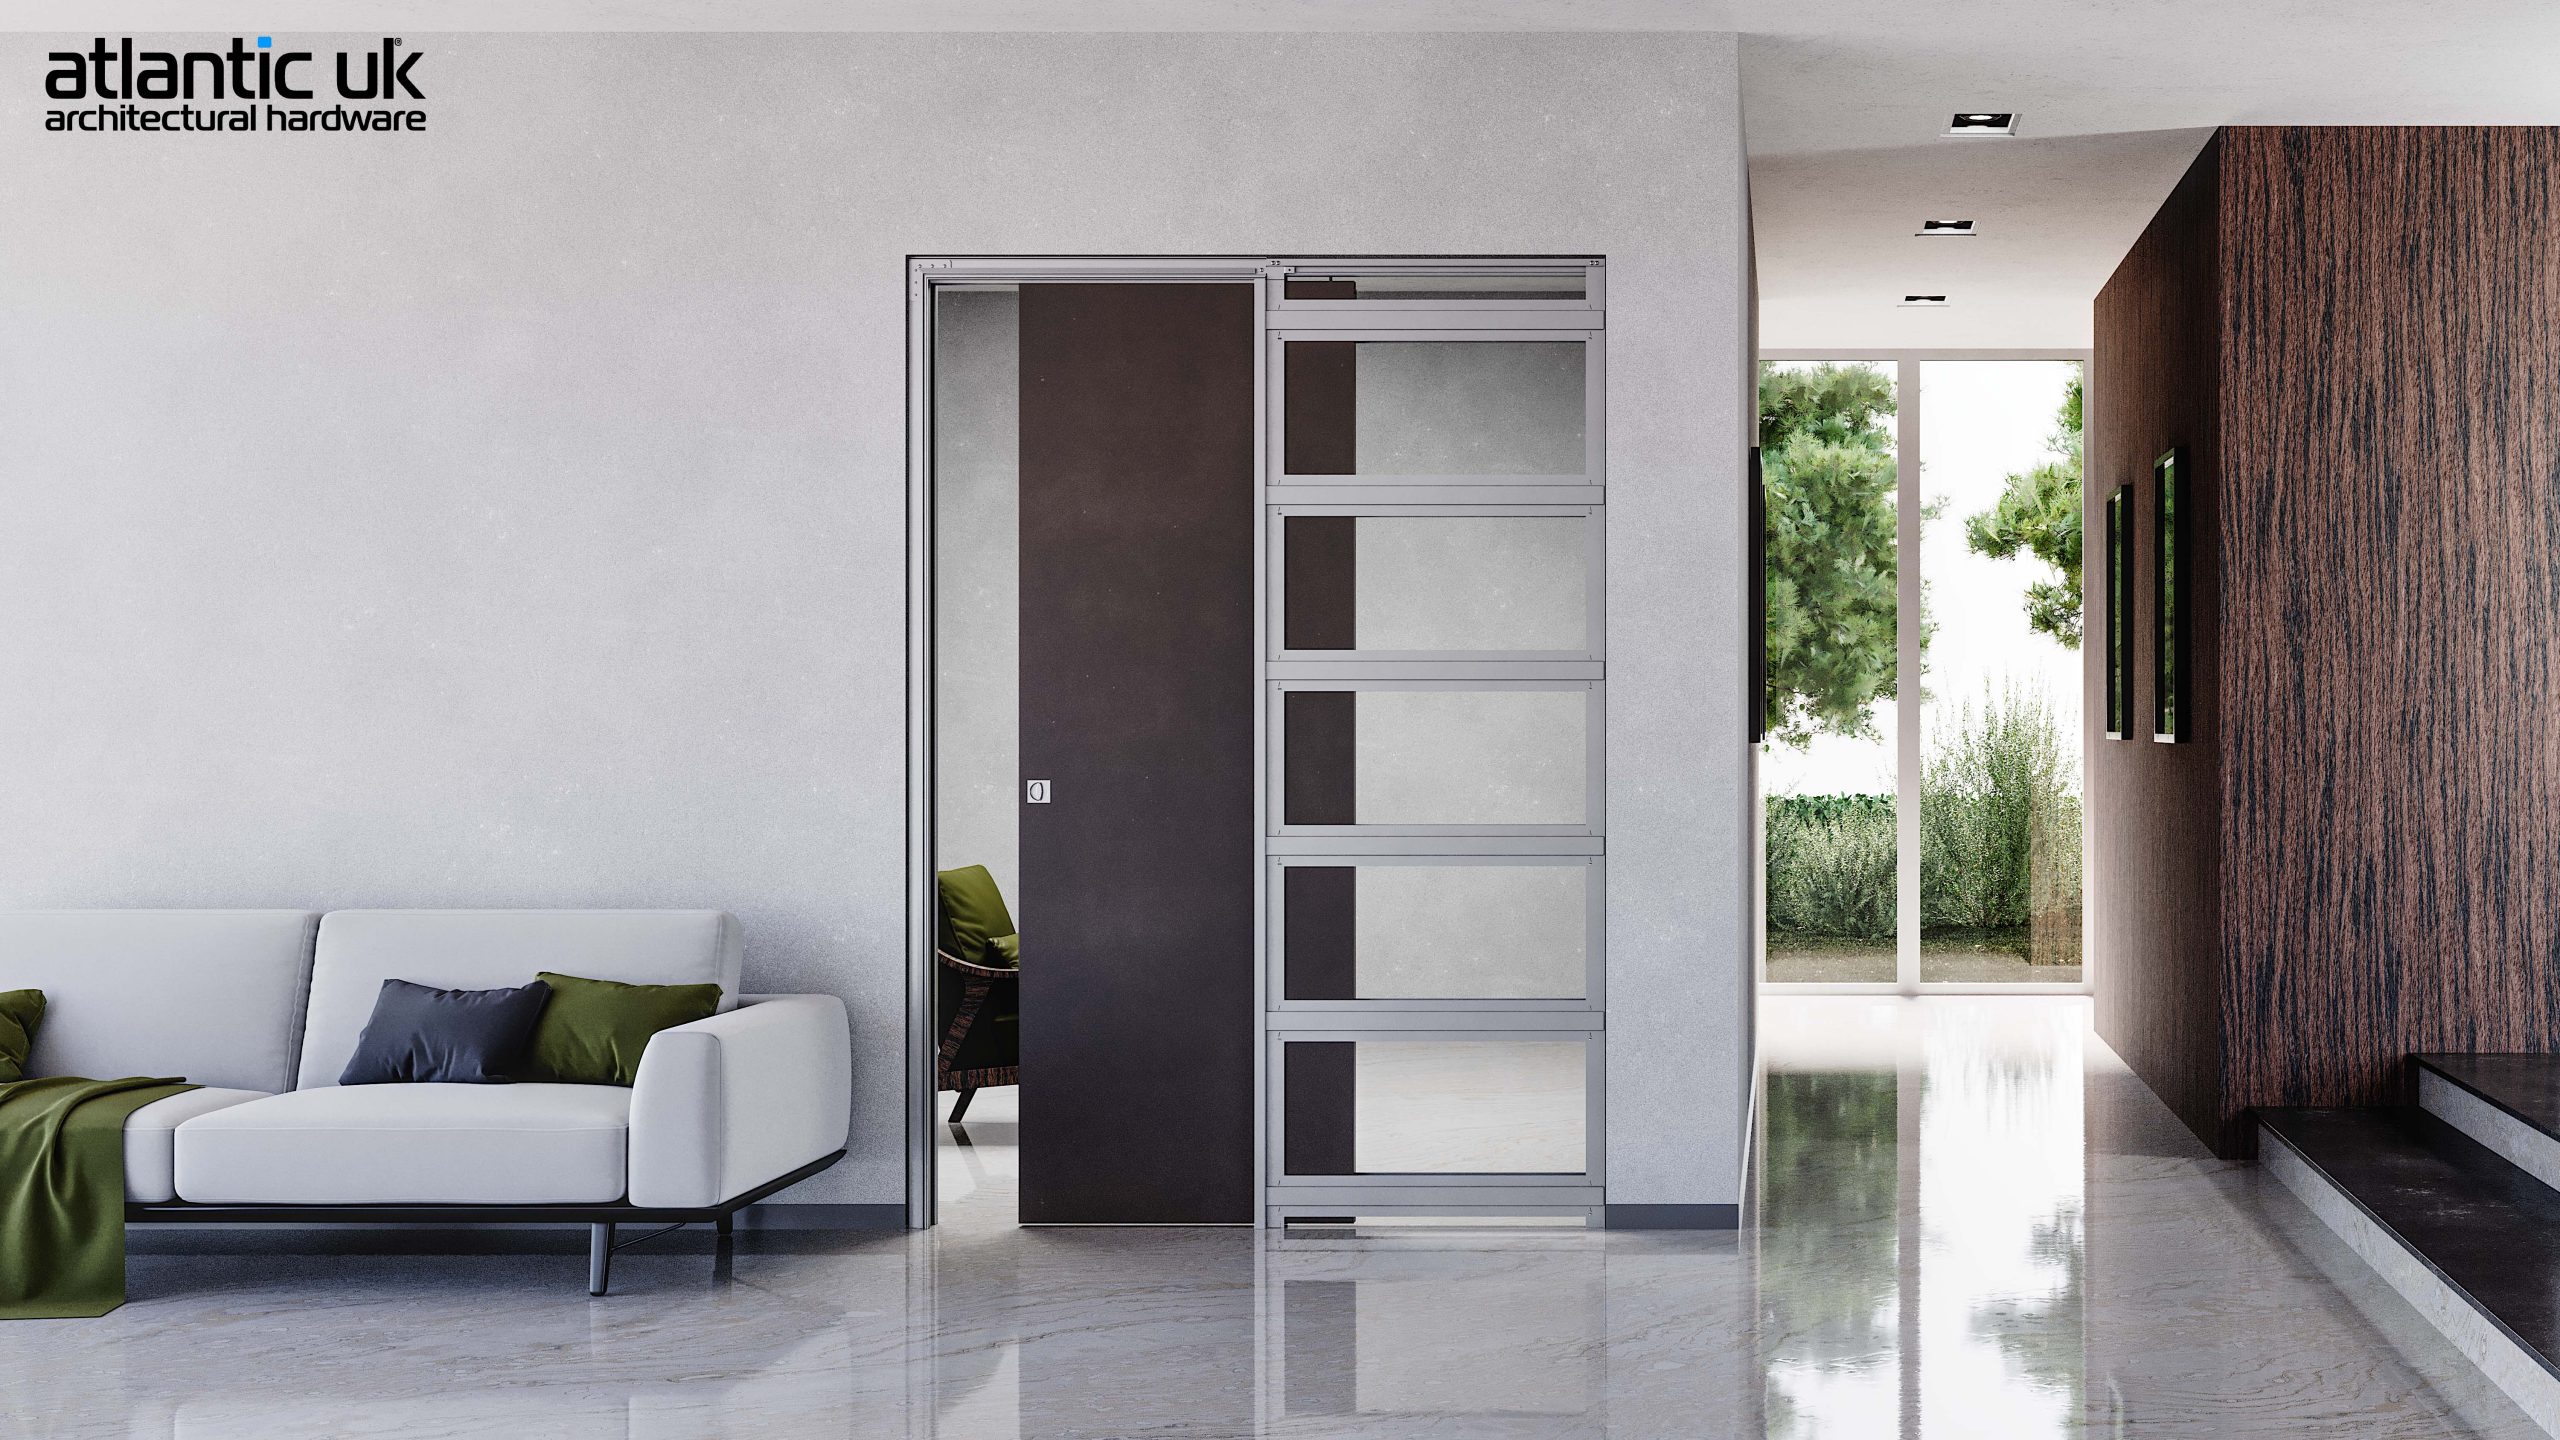 The Pros & Cons of Pocket Doors